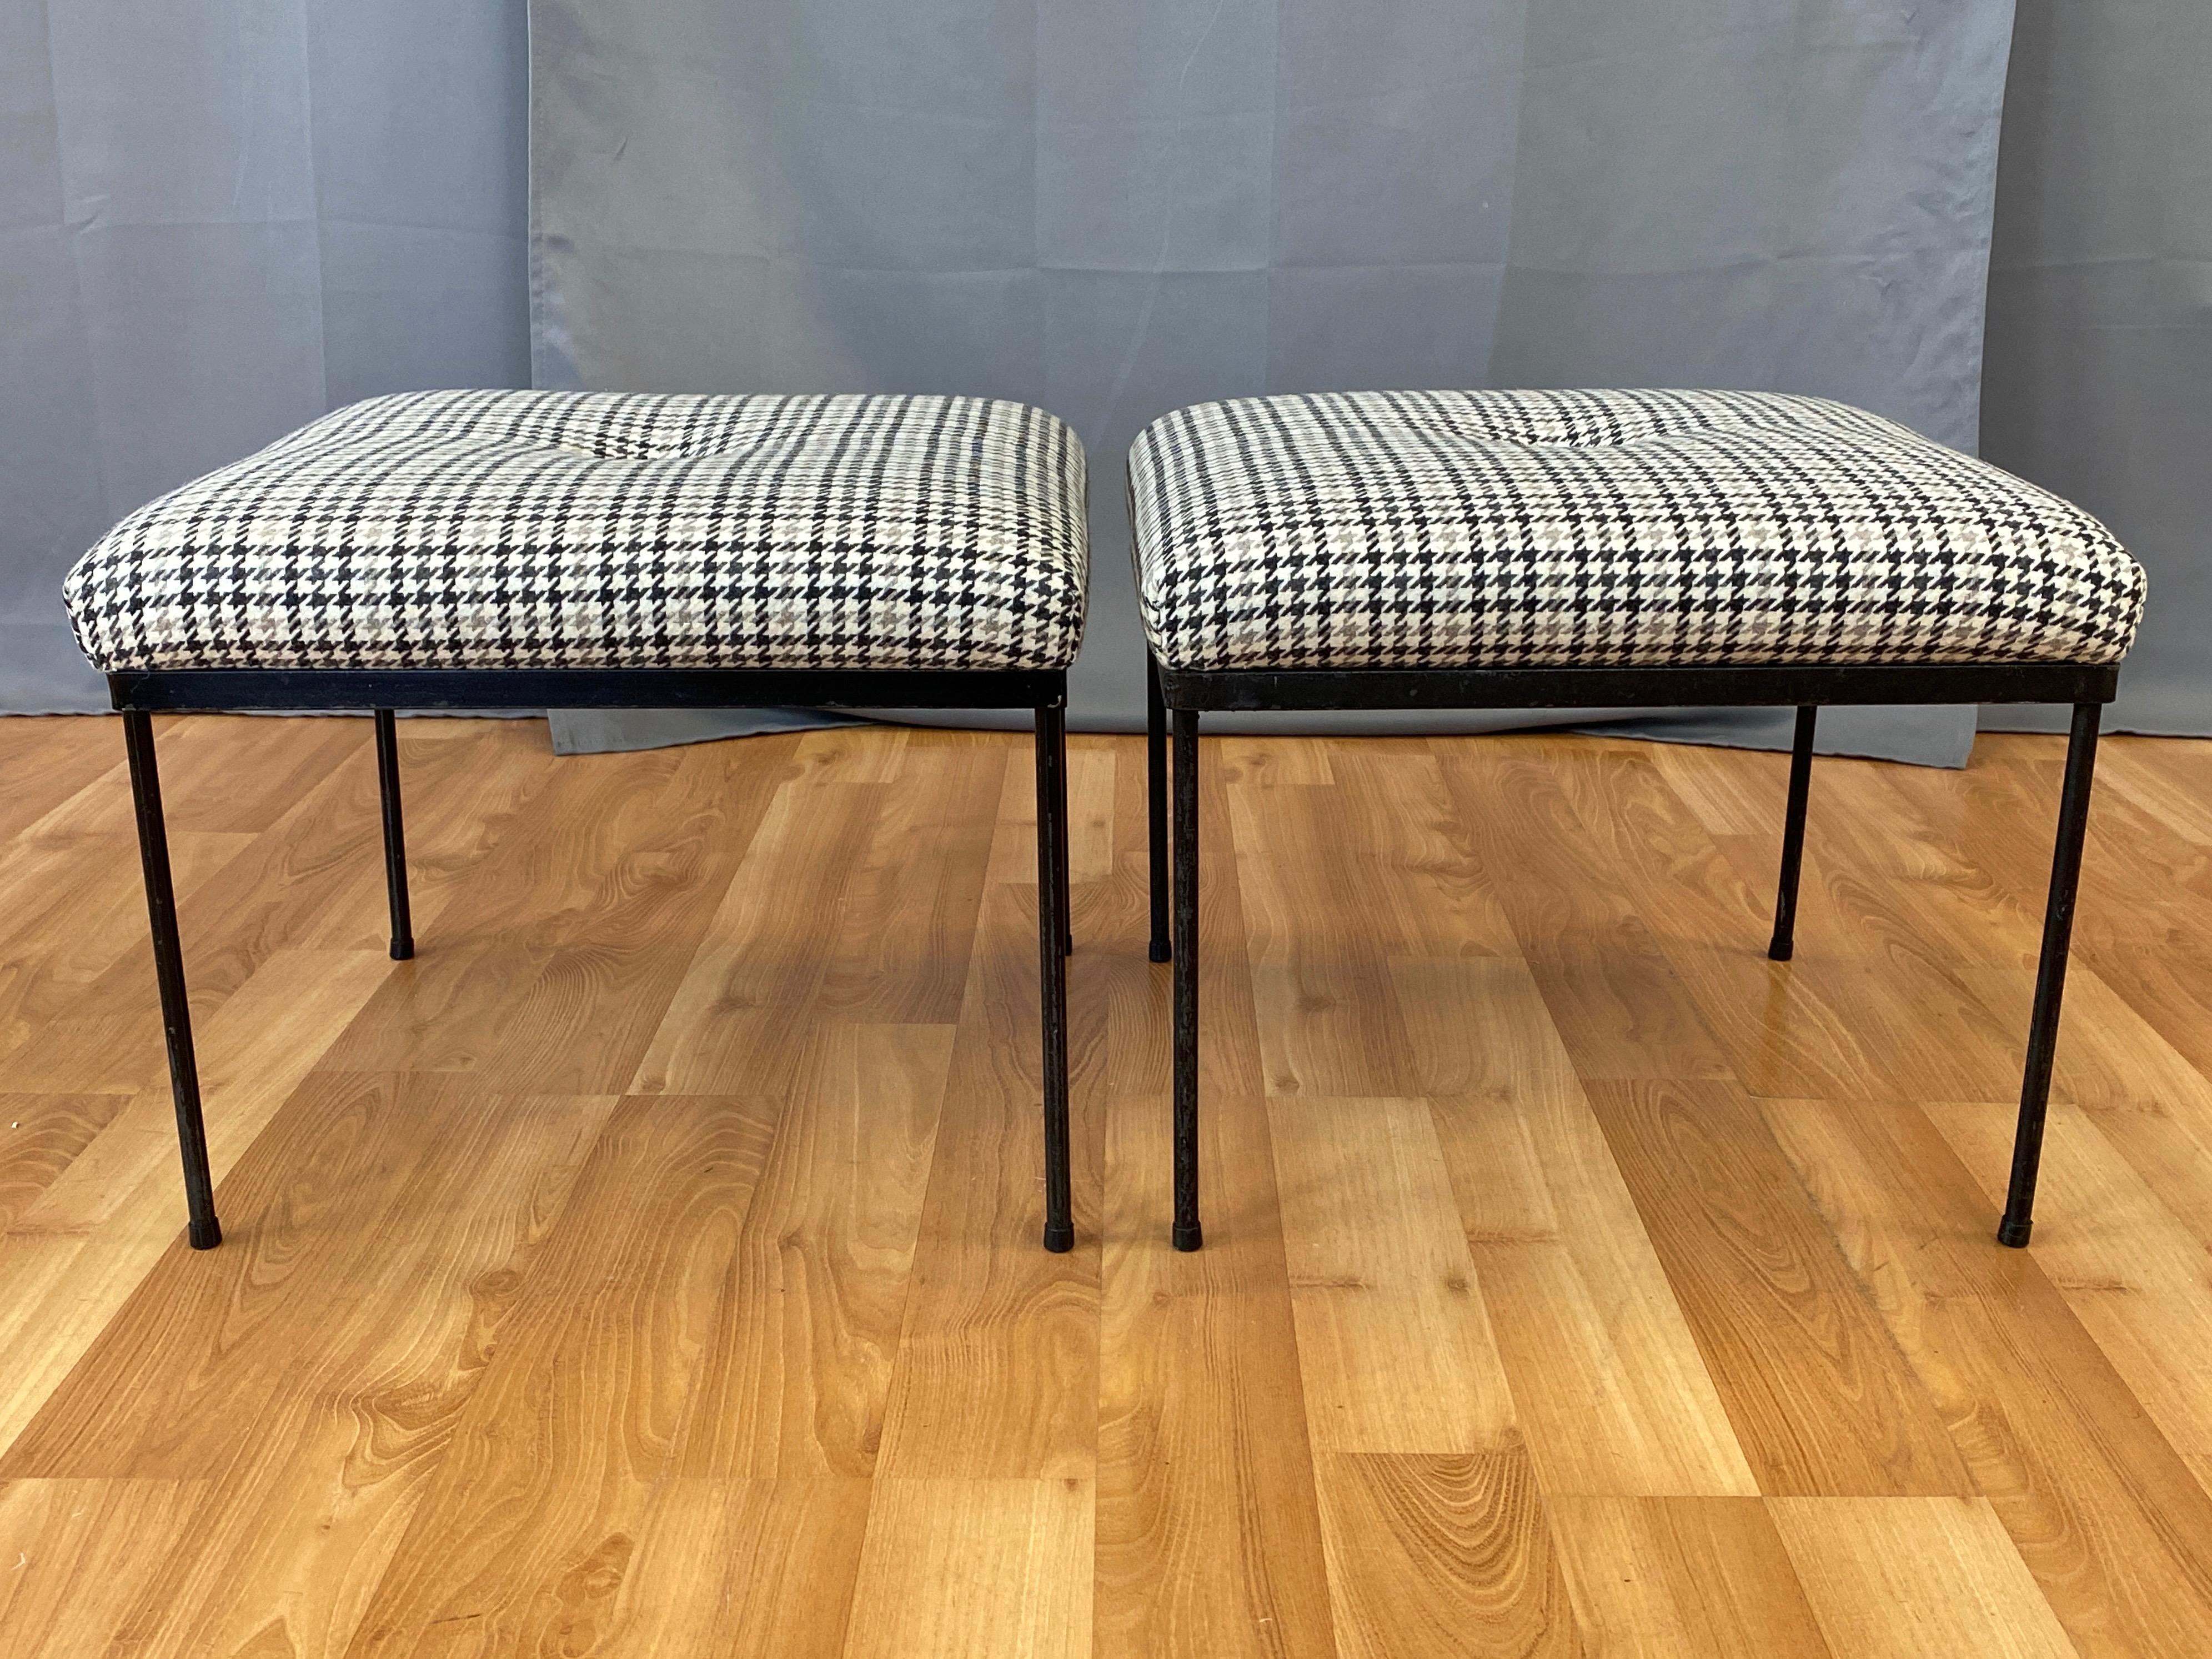 Lacquered Pair of Paul McCobb-Style Houndstooth Upholstered Ottomans by Mallin, 1950s